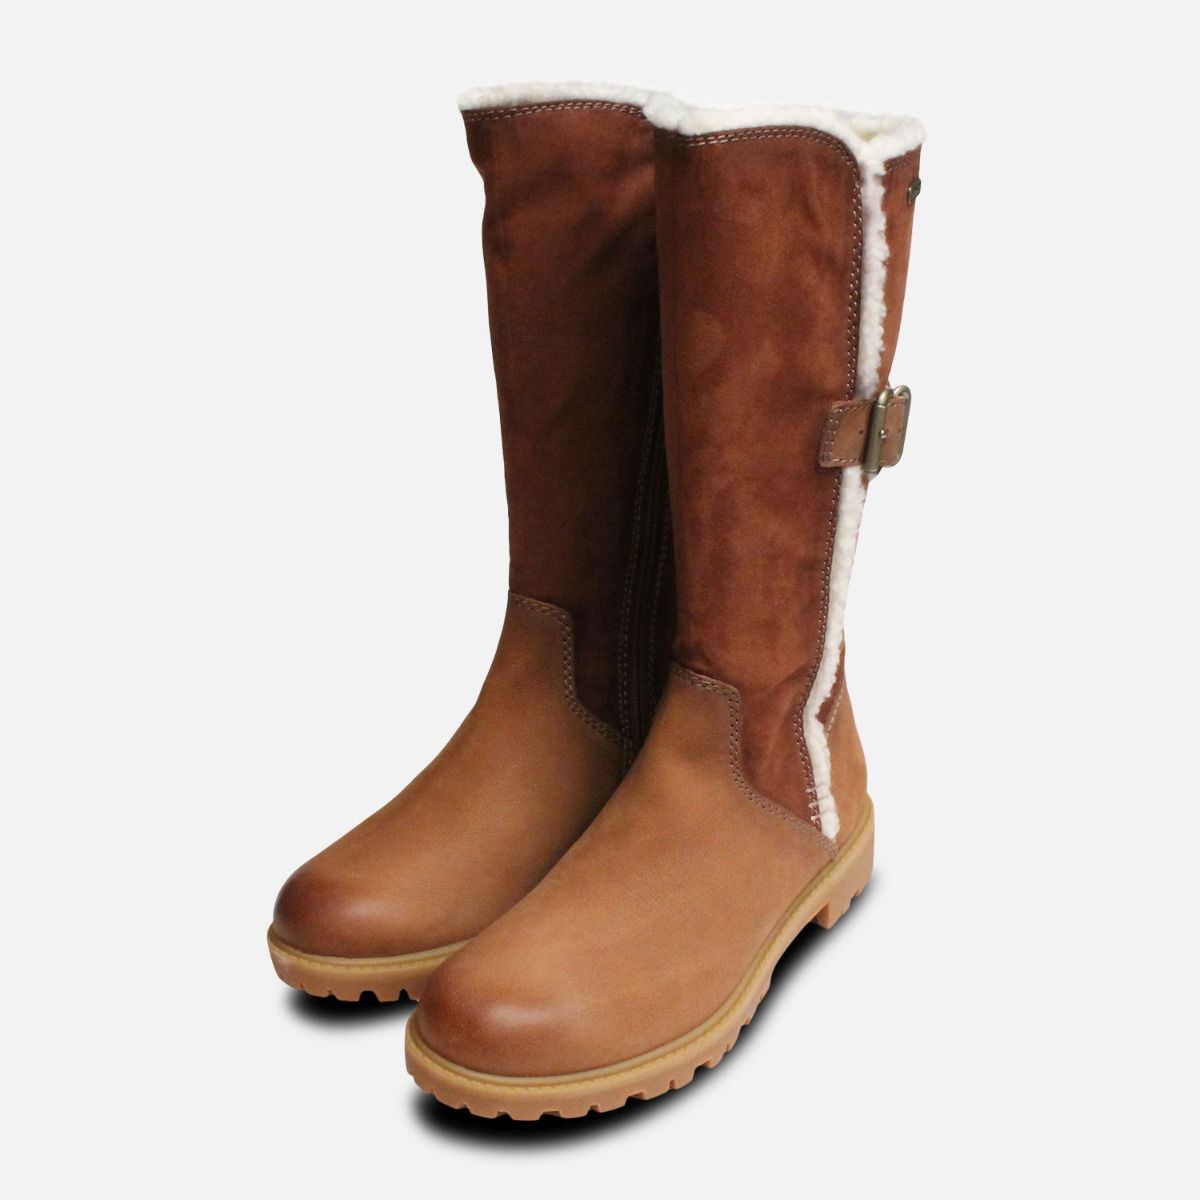 duo tex boots